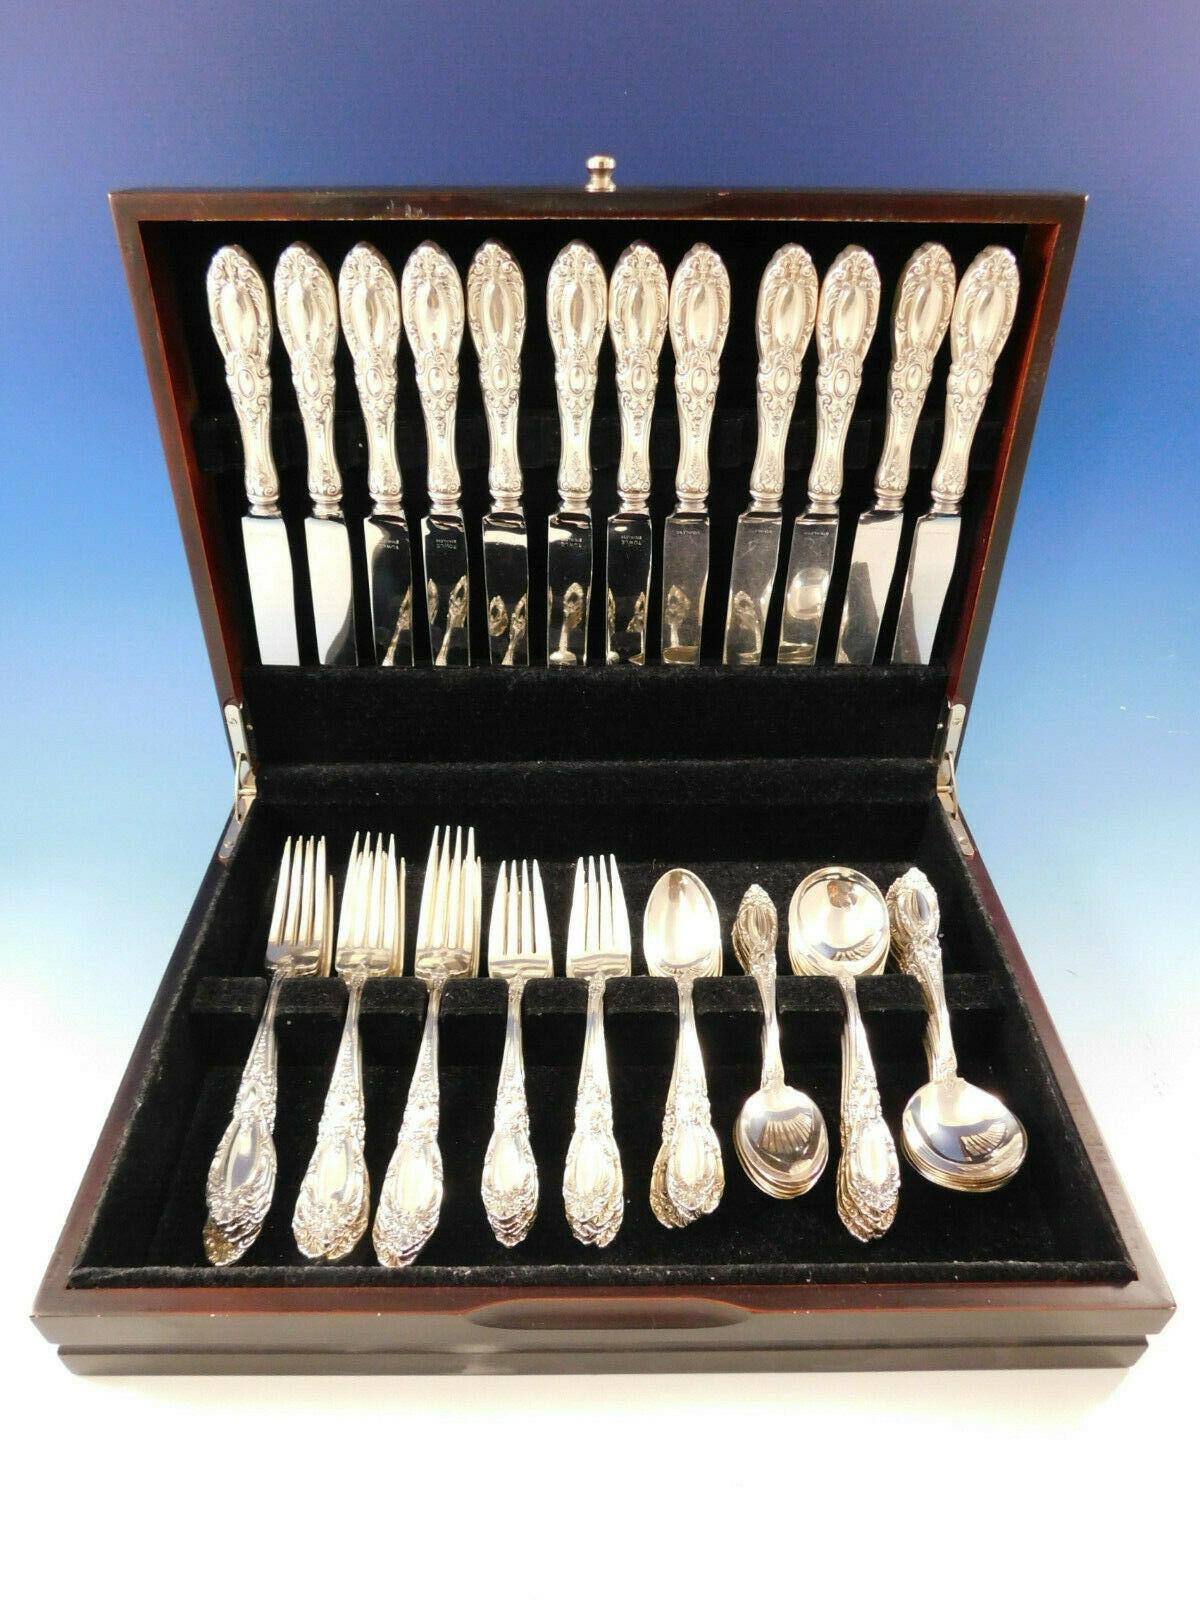 Dinner Size King Richard by Towle sterling silver flatware set of 60 pieces. This set includes:

12 dinner size knives, french blades, 9 7/8